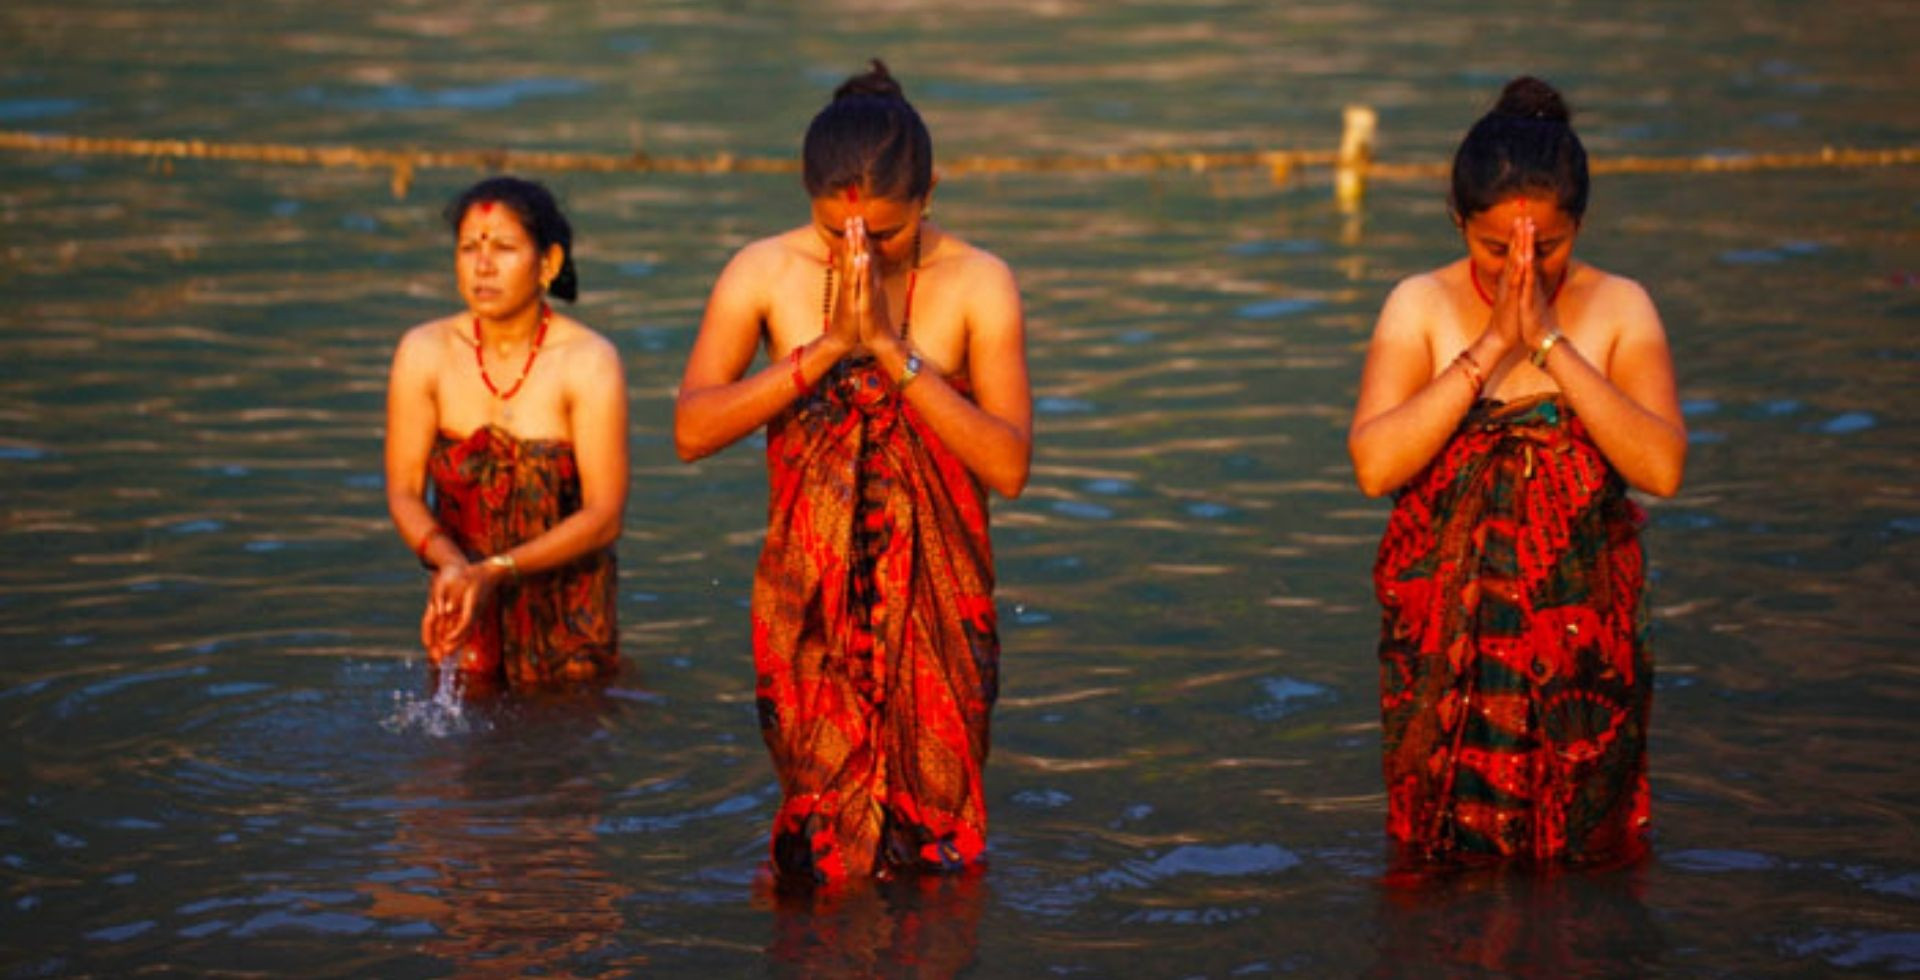 women worshipping the sun god on the ocassion of chathh parva